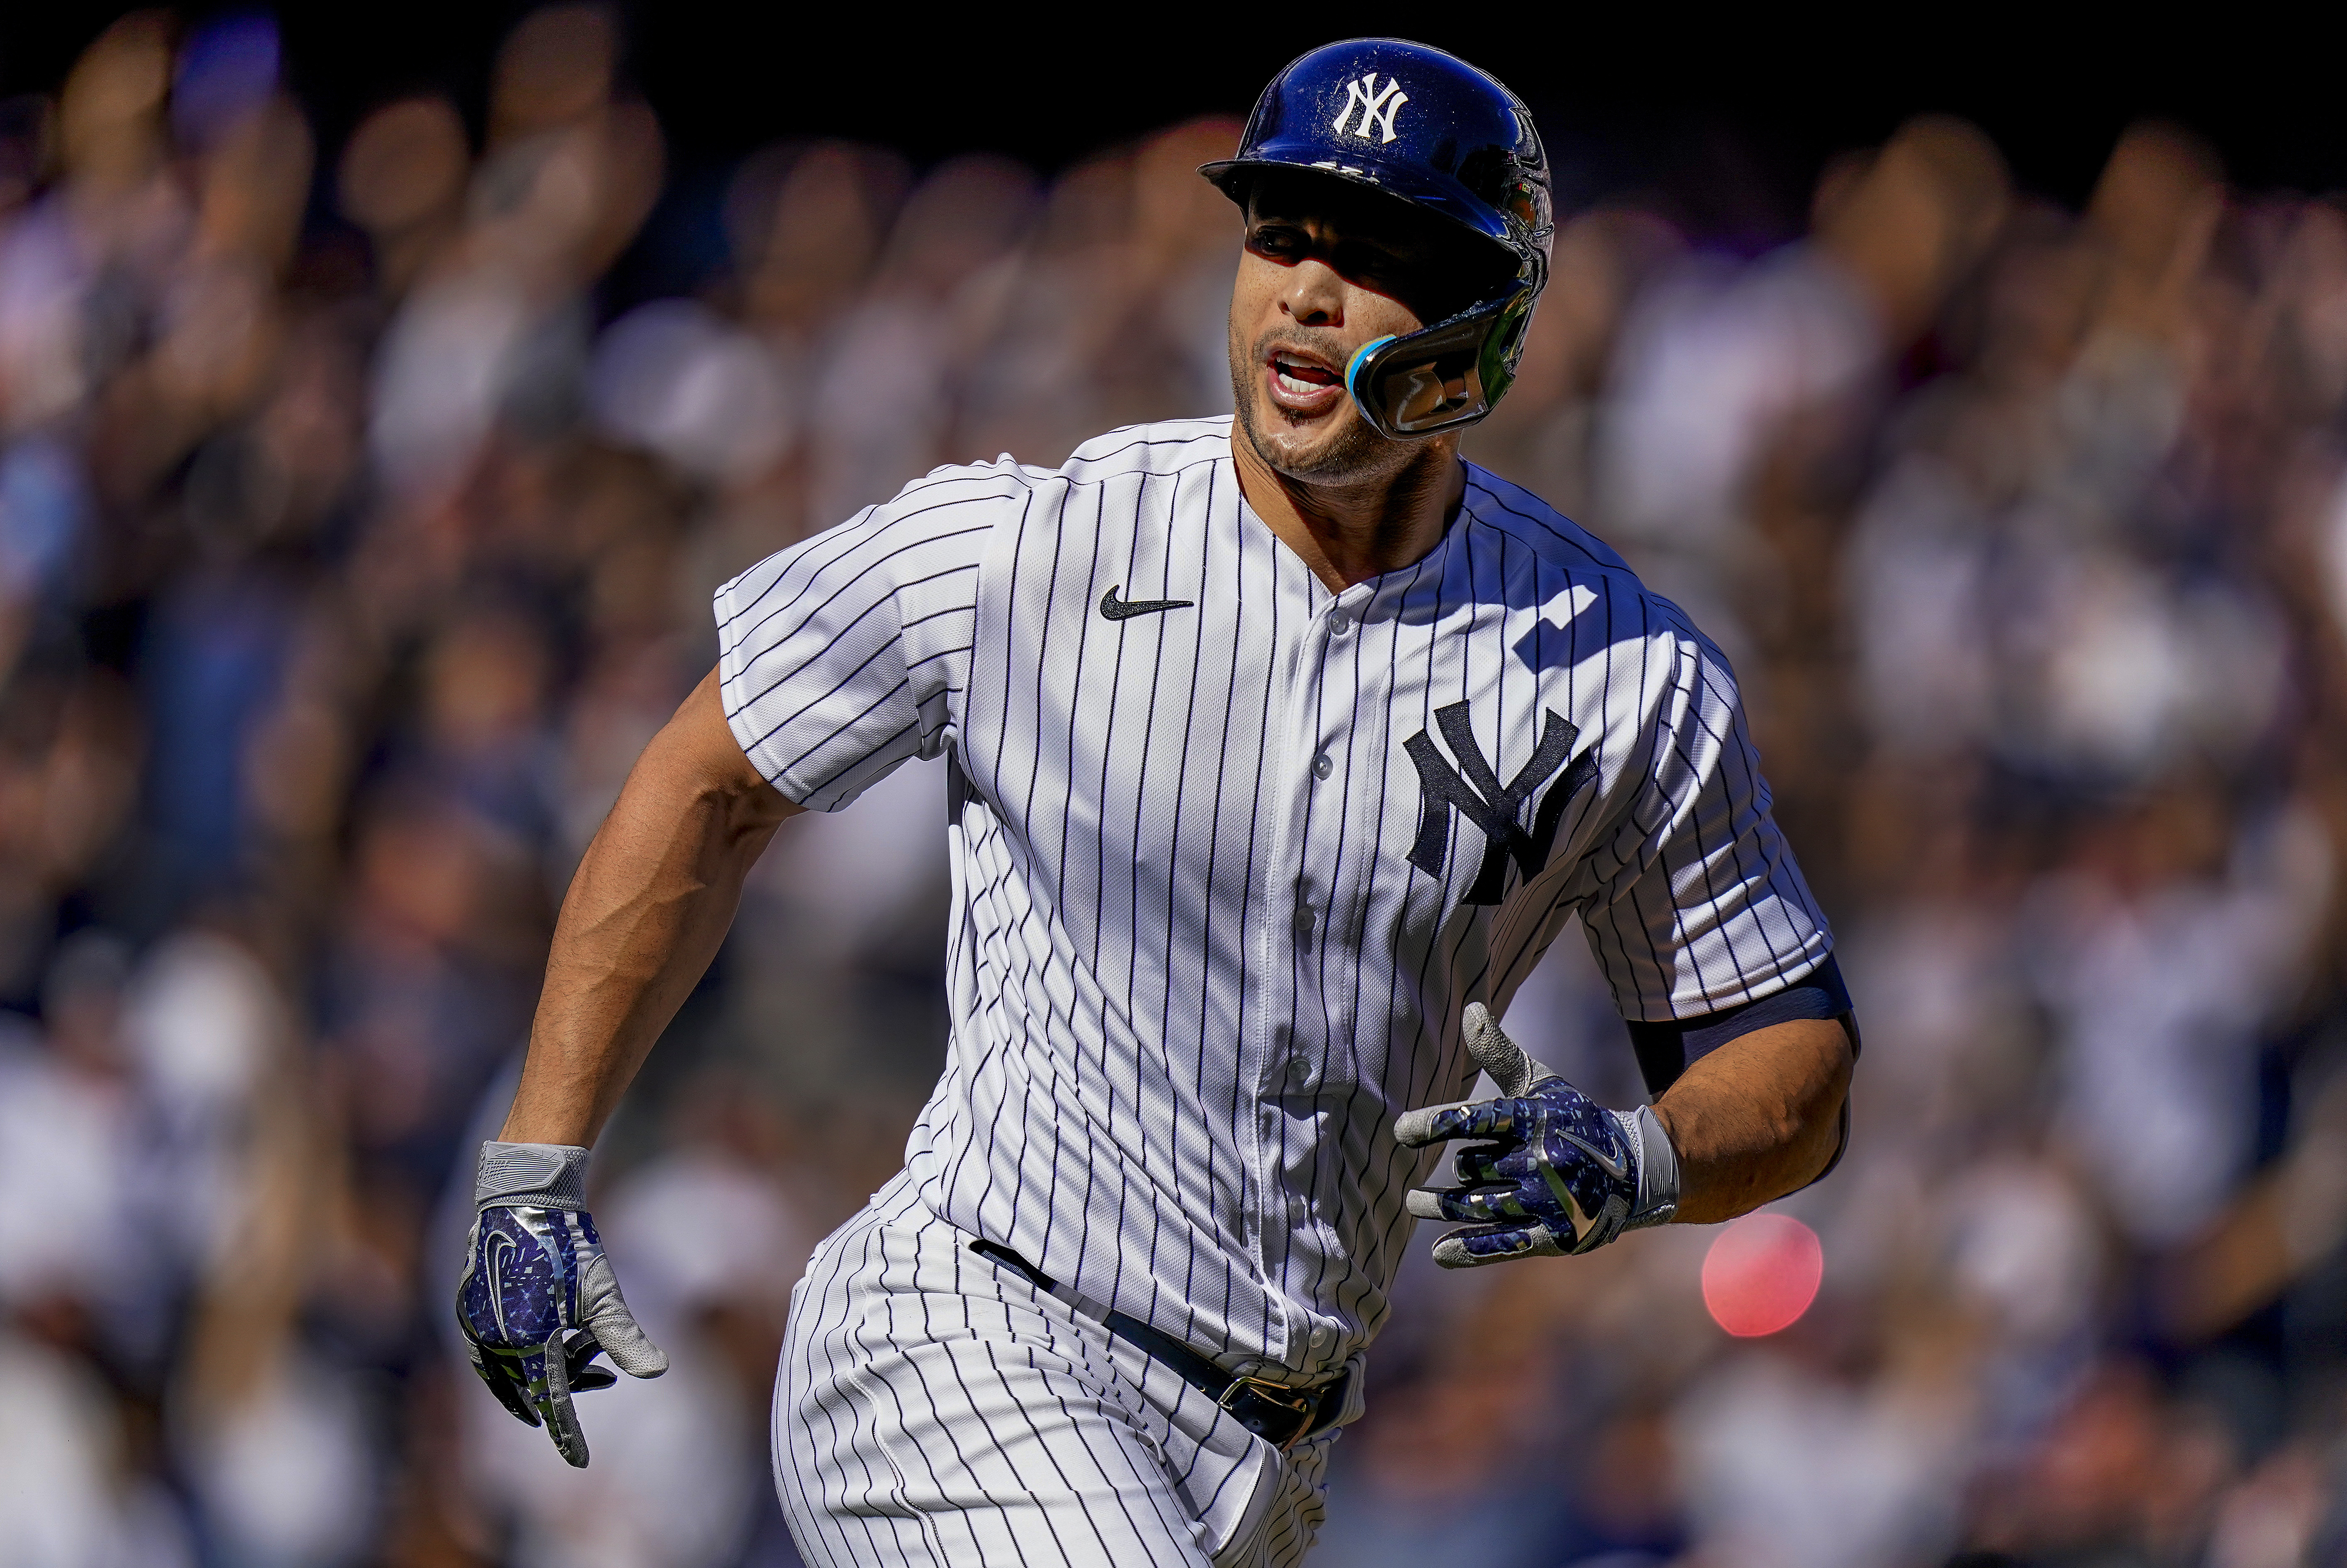 Yankees' Giancarlo Stanton revealed the secret of his strength to